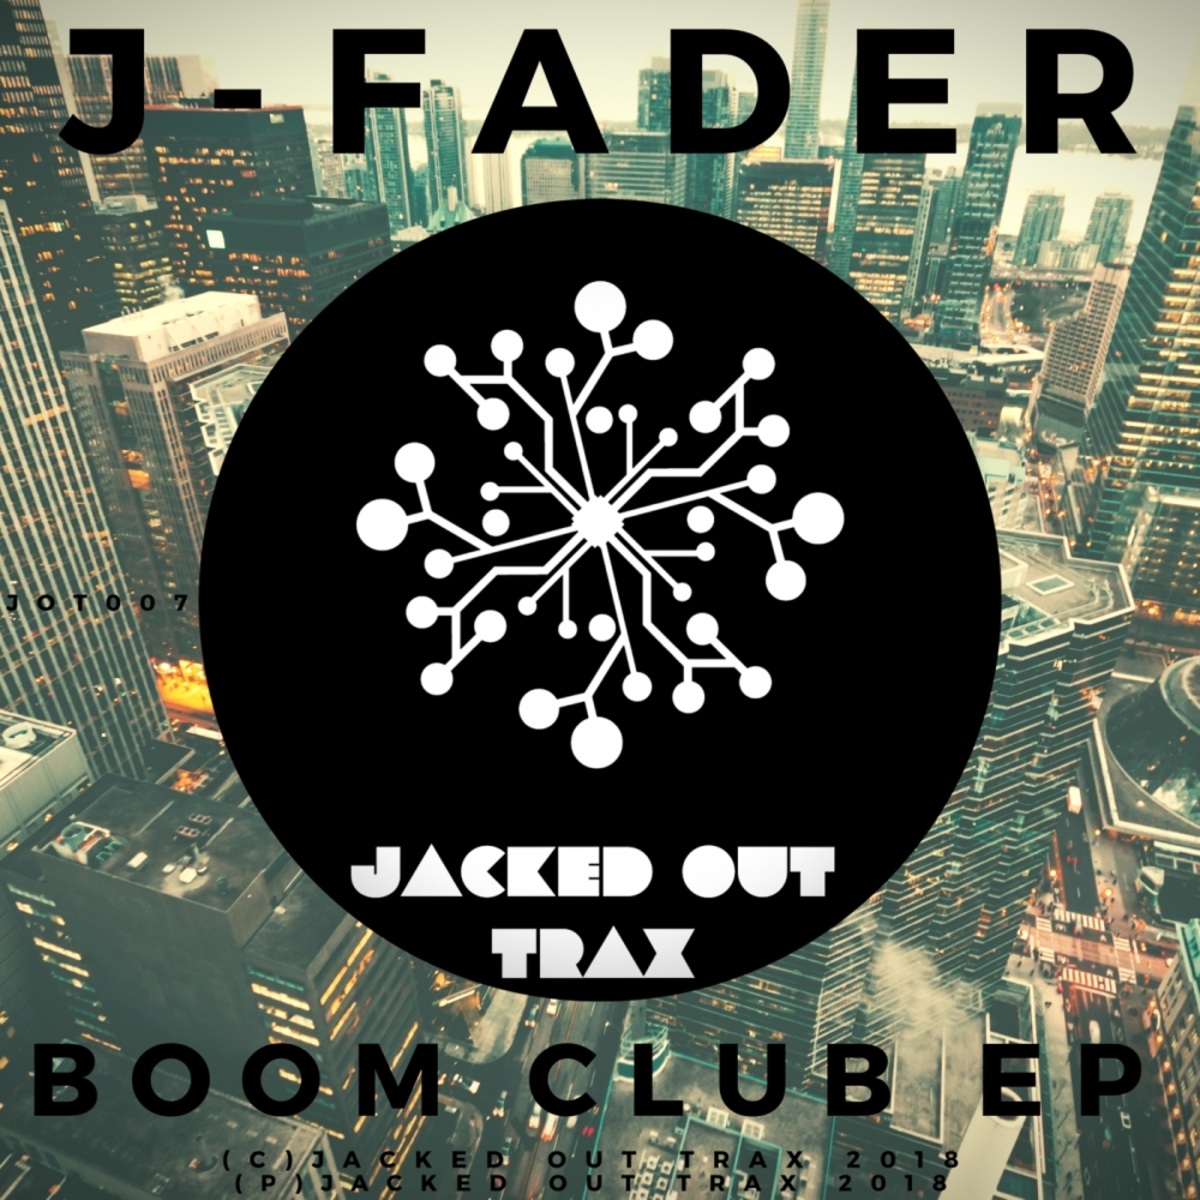 J-Fader - Boom Club EP / Jacked Out Trax